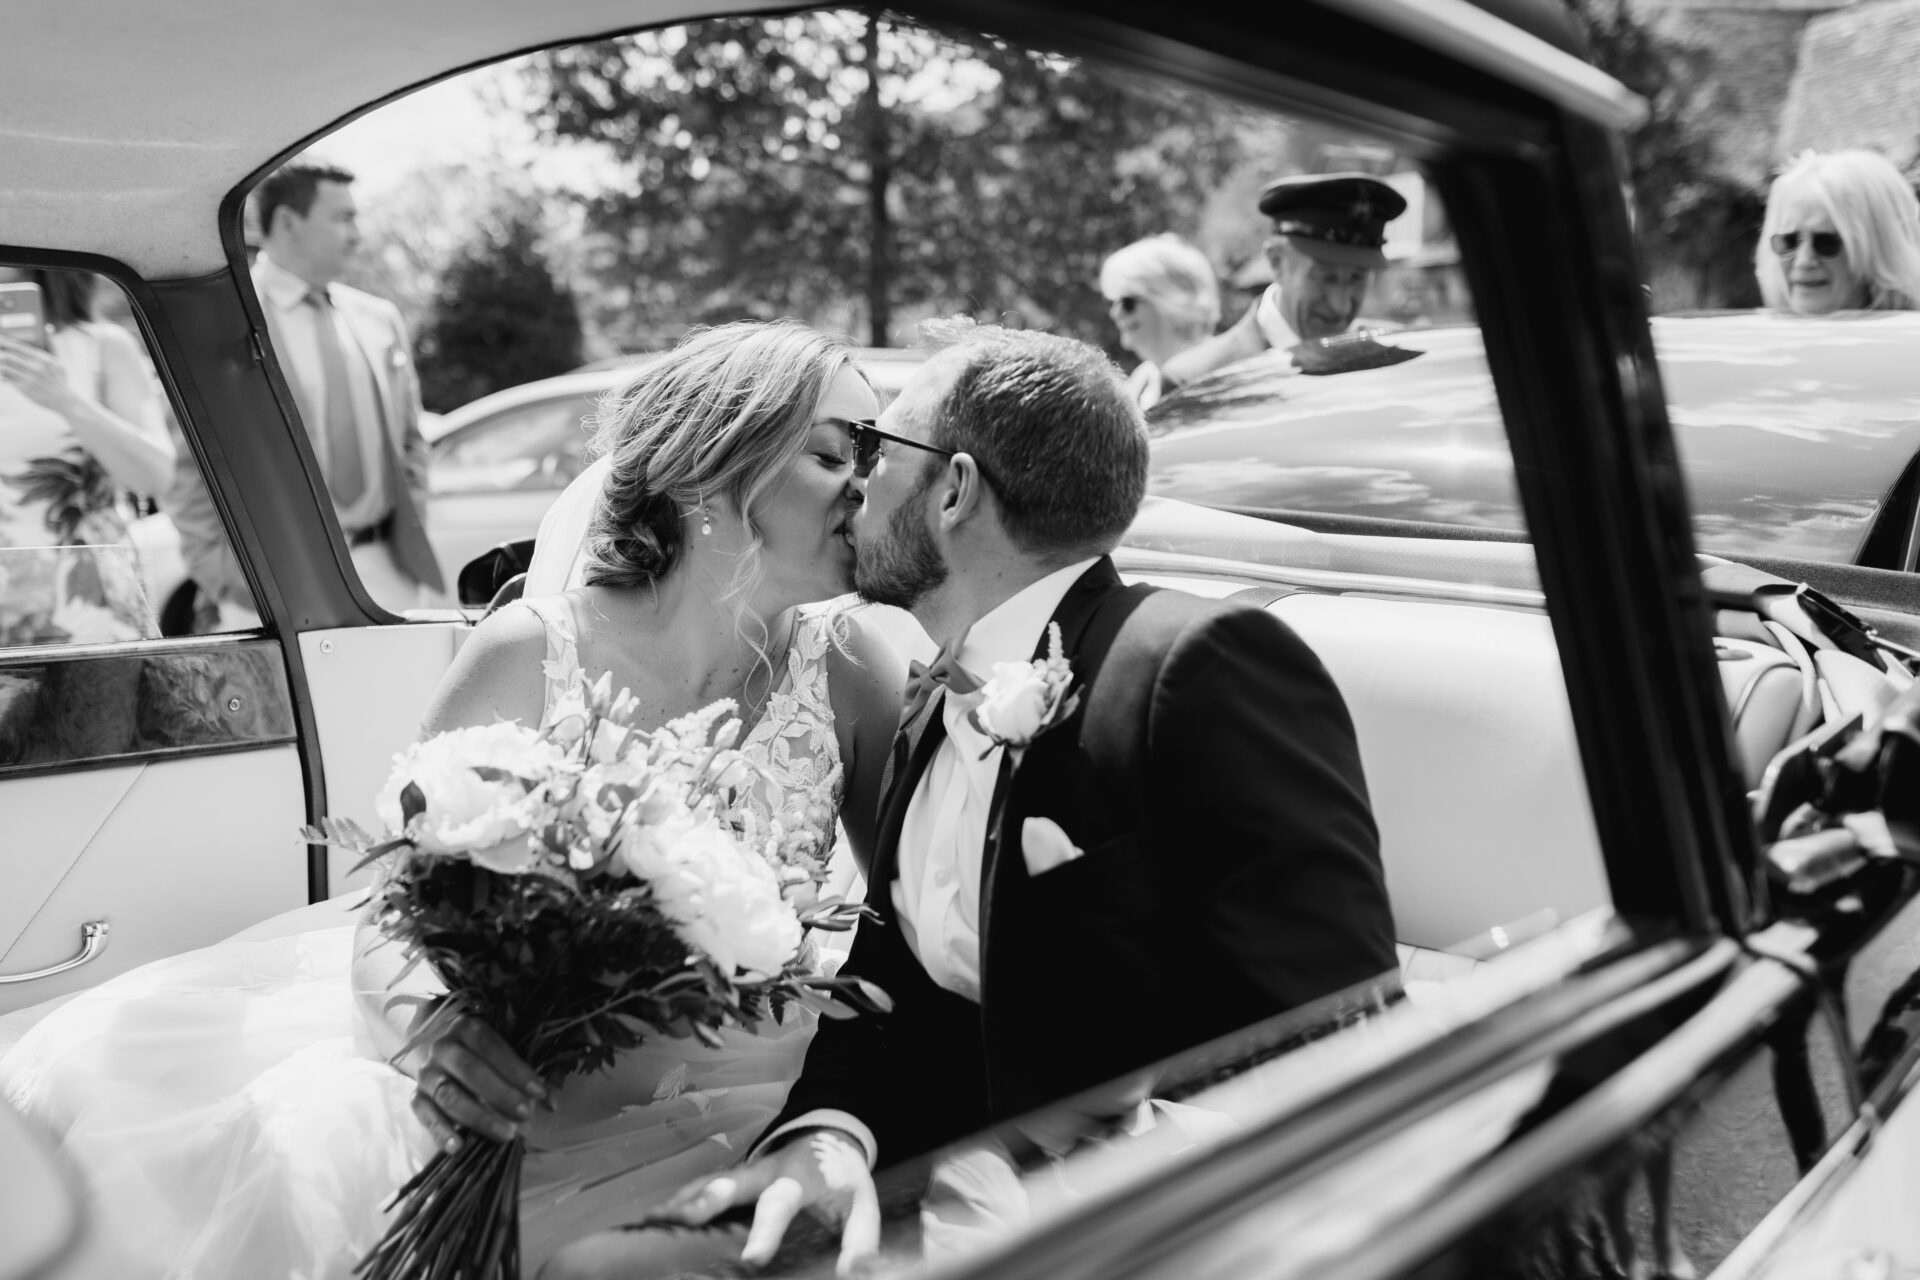 The bride and groom share a kiss as they leave their church wedding ceremony